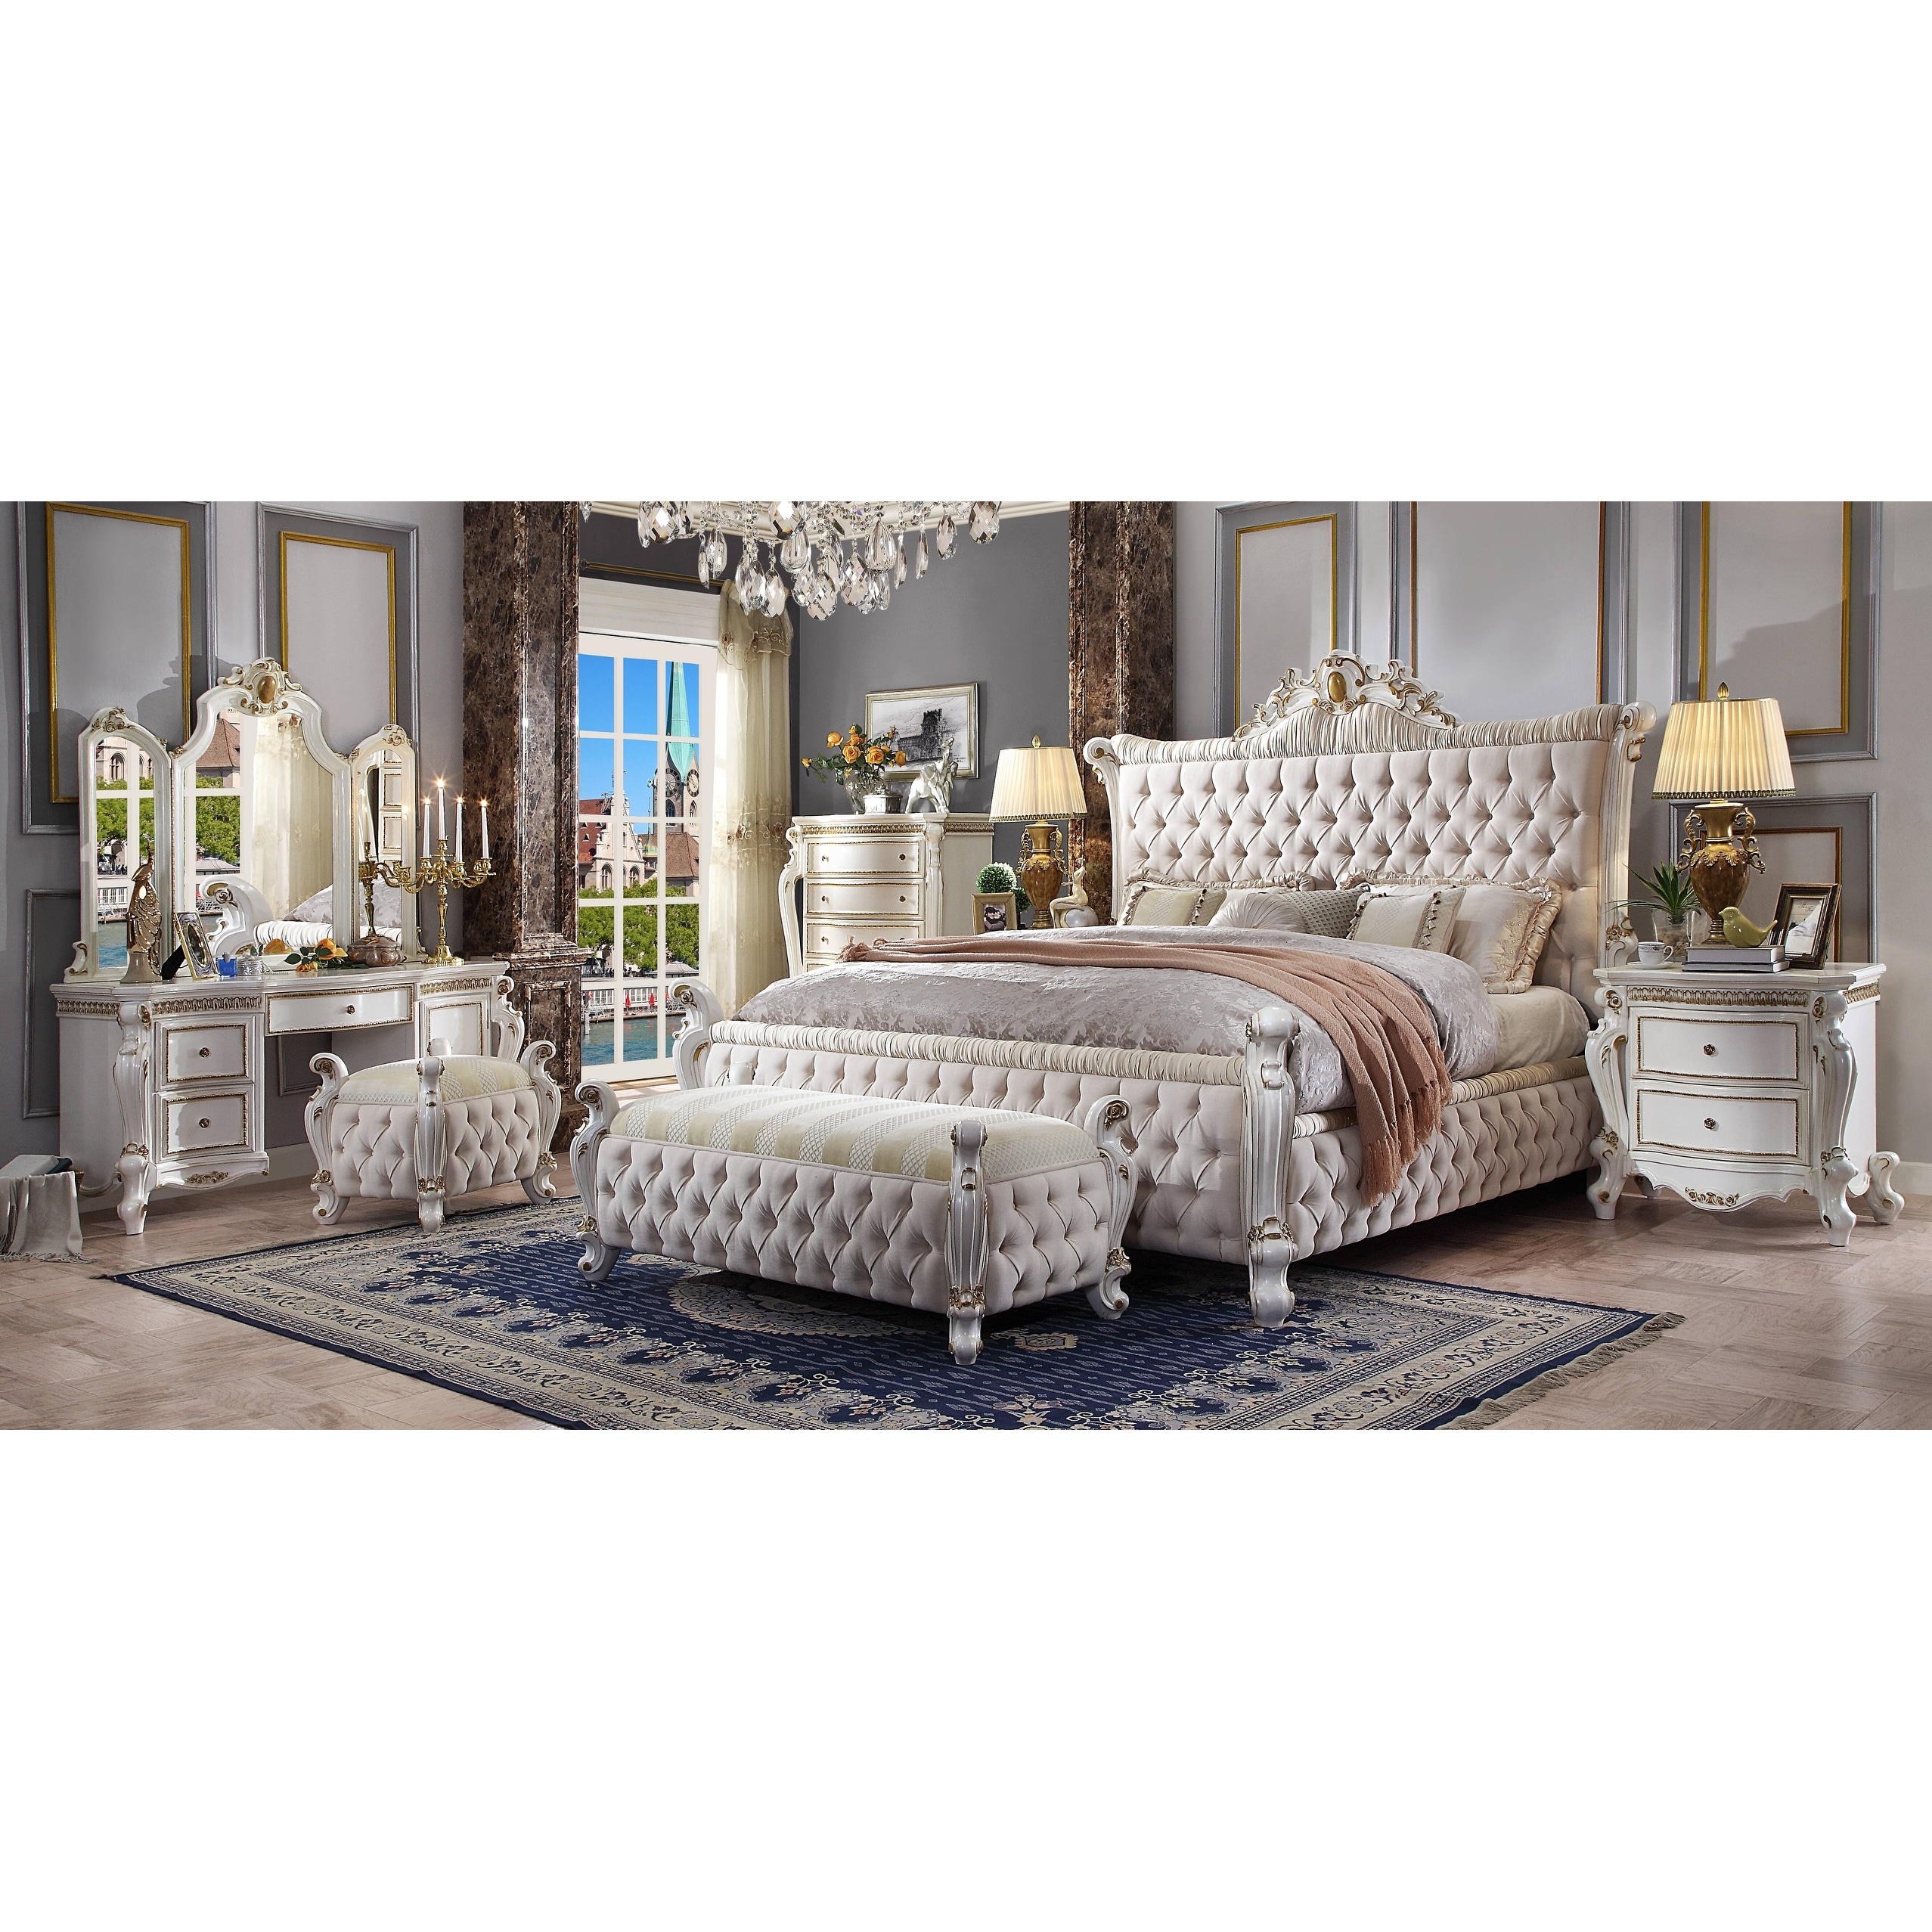 ACME Picardy California King Bed in Fabric & Antique Pearl